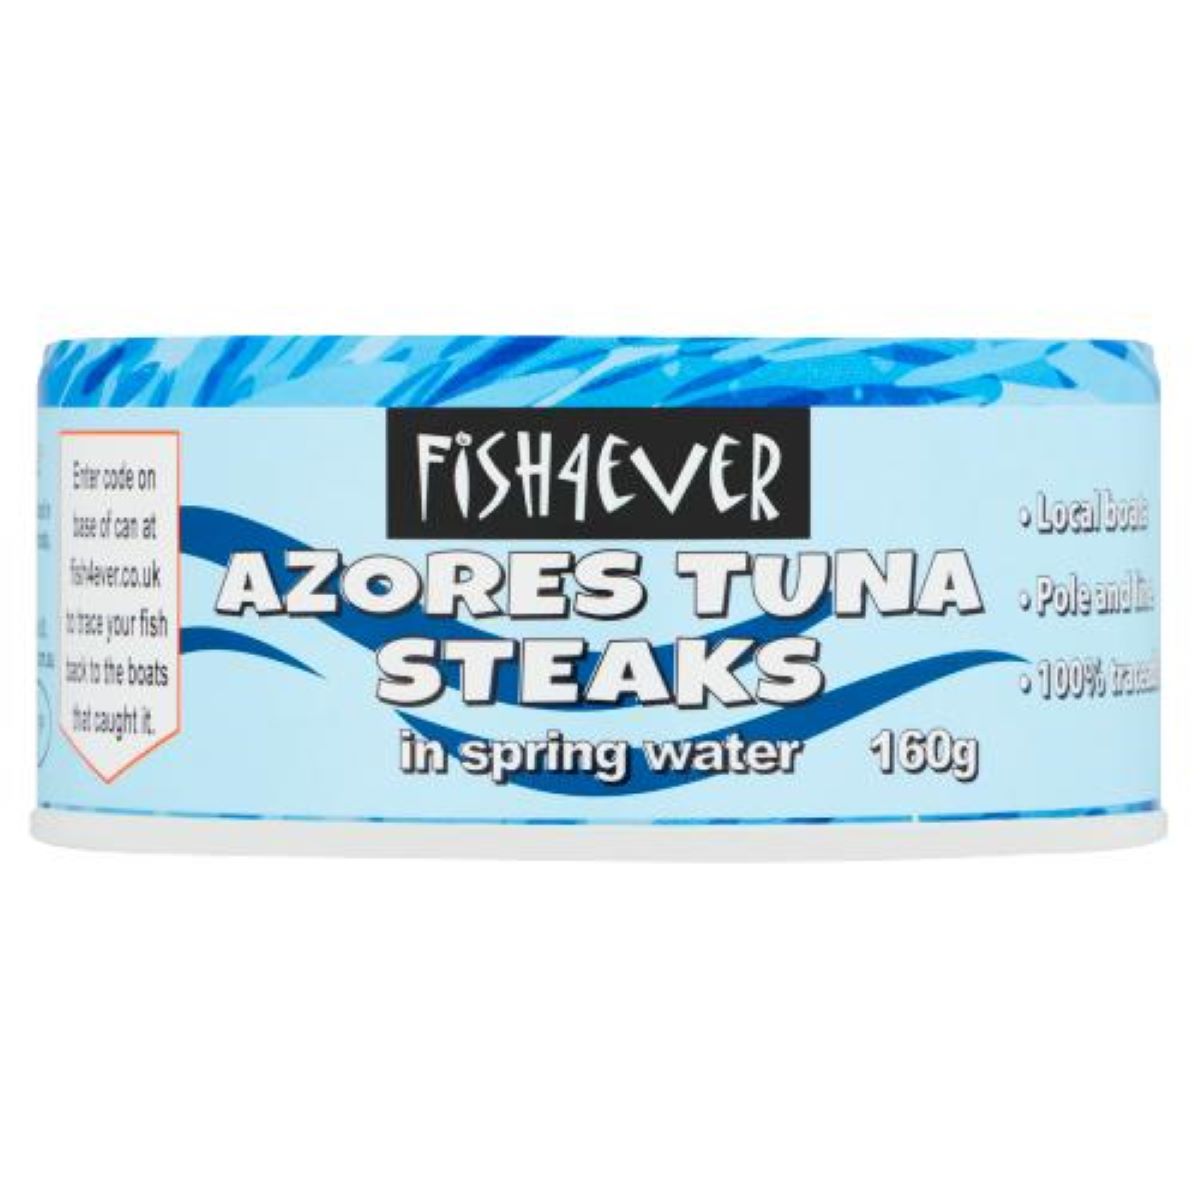 Fish4Ever Azores Tuna Steaks In Spring Water 160g